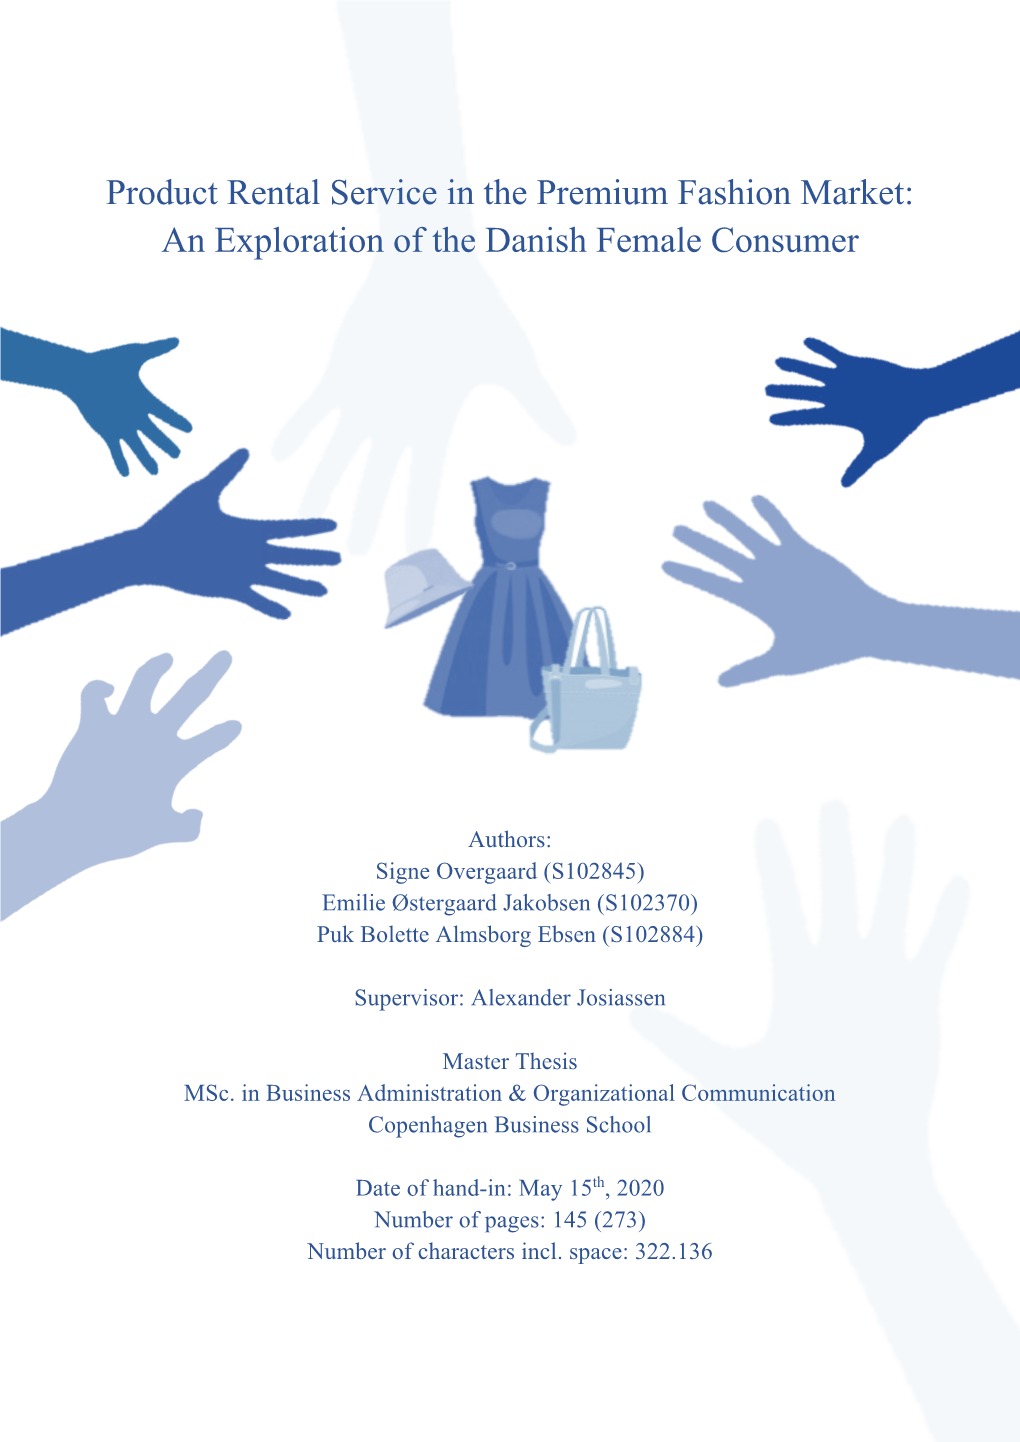 Product Rental Service in the Premium Fashion Market: an Exploration of the Danish Female Consumer